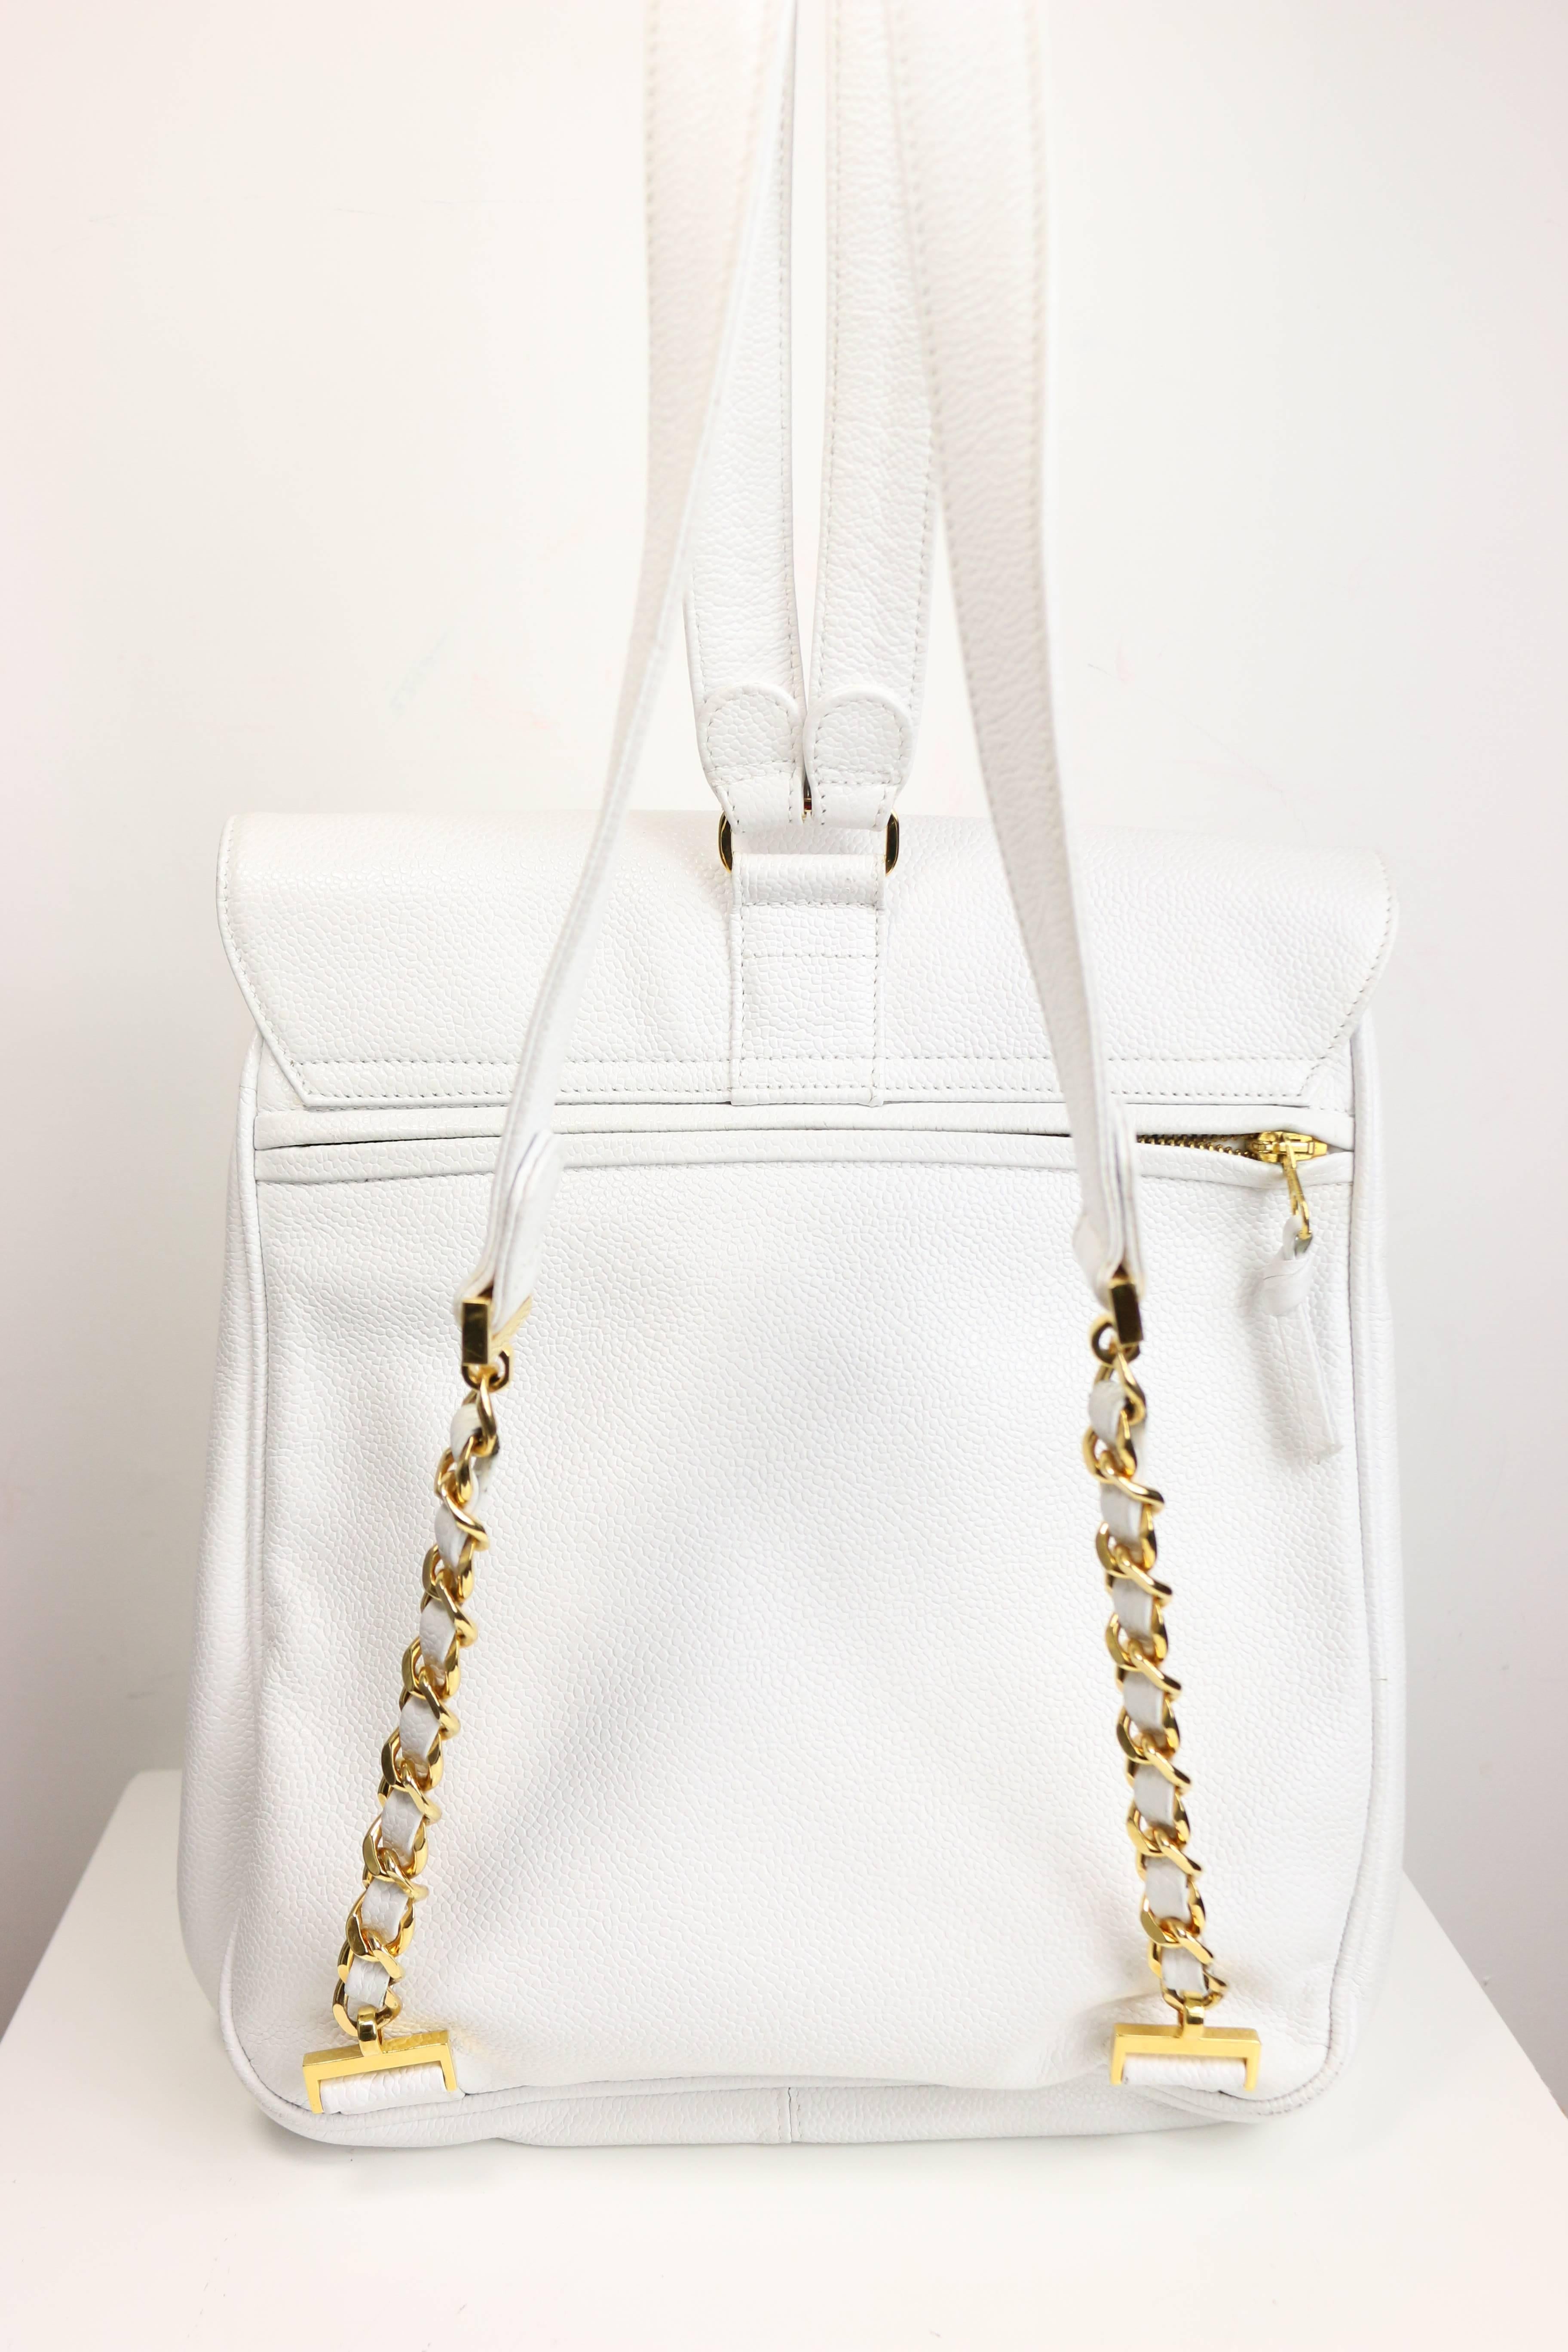 - Vintage Chanel white caviar leather gold logo backpack bag from 1994 to 1996 collection. 

- Sizes: 25 x 24 x 12 cm .

